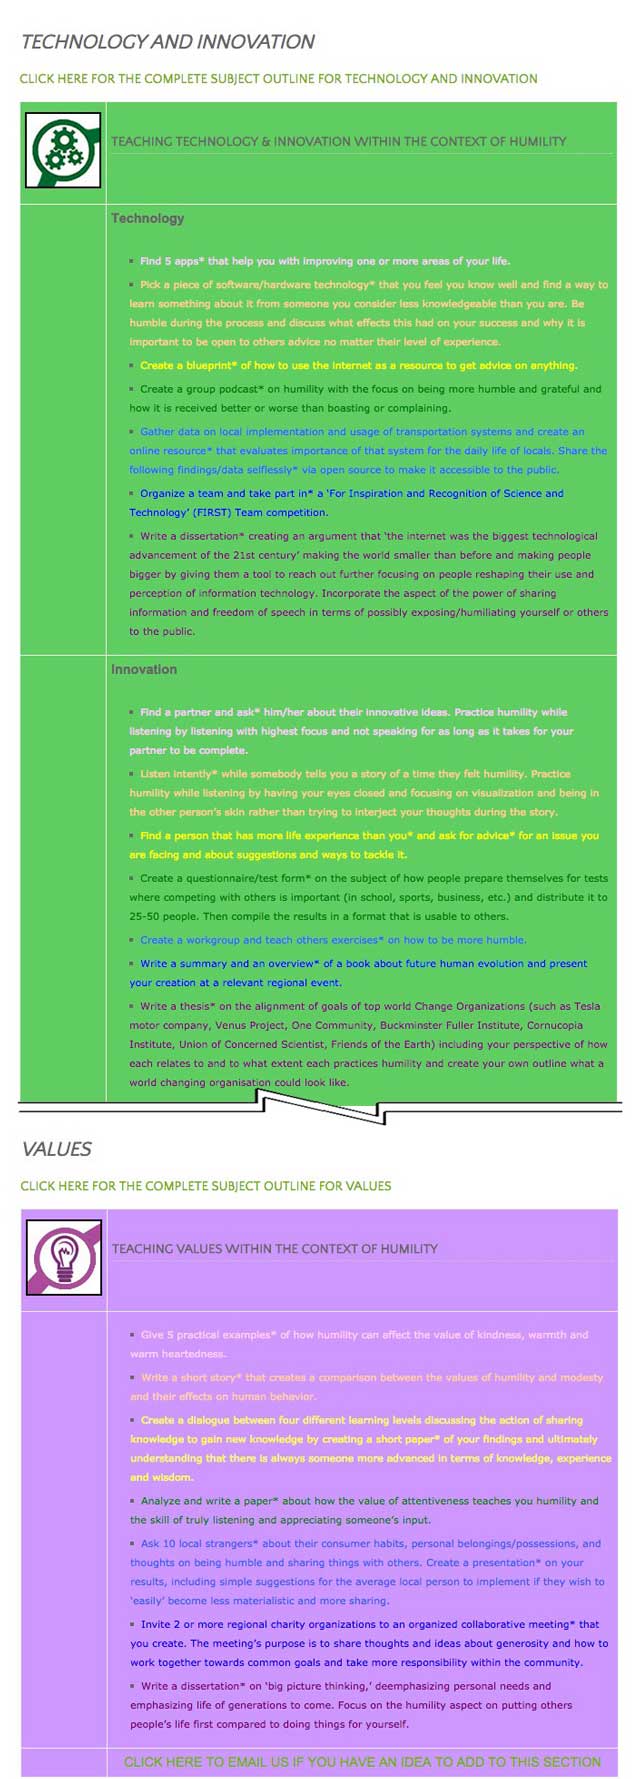 This last week the core team transferred the final 25% of the written content for the Humility Lesson Plan to the website, as you see here. This lesson plan purposed to teach all subjects, to all learning levels, in any learning environment, using the central theme of “Humility” is now 100% completed on our website. ,restoring sustainable balance